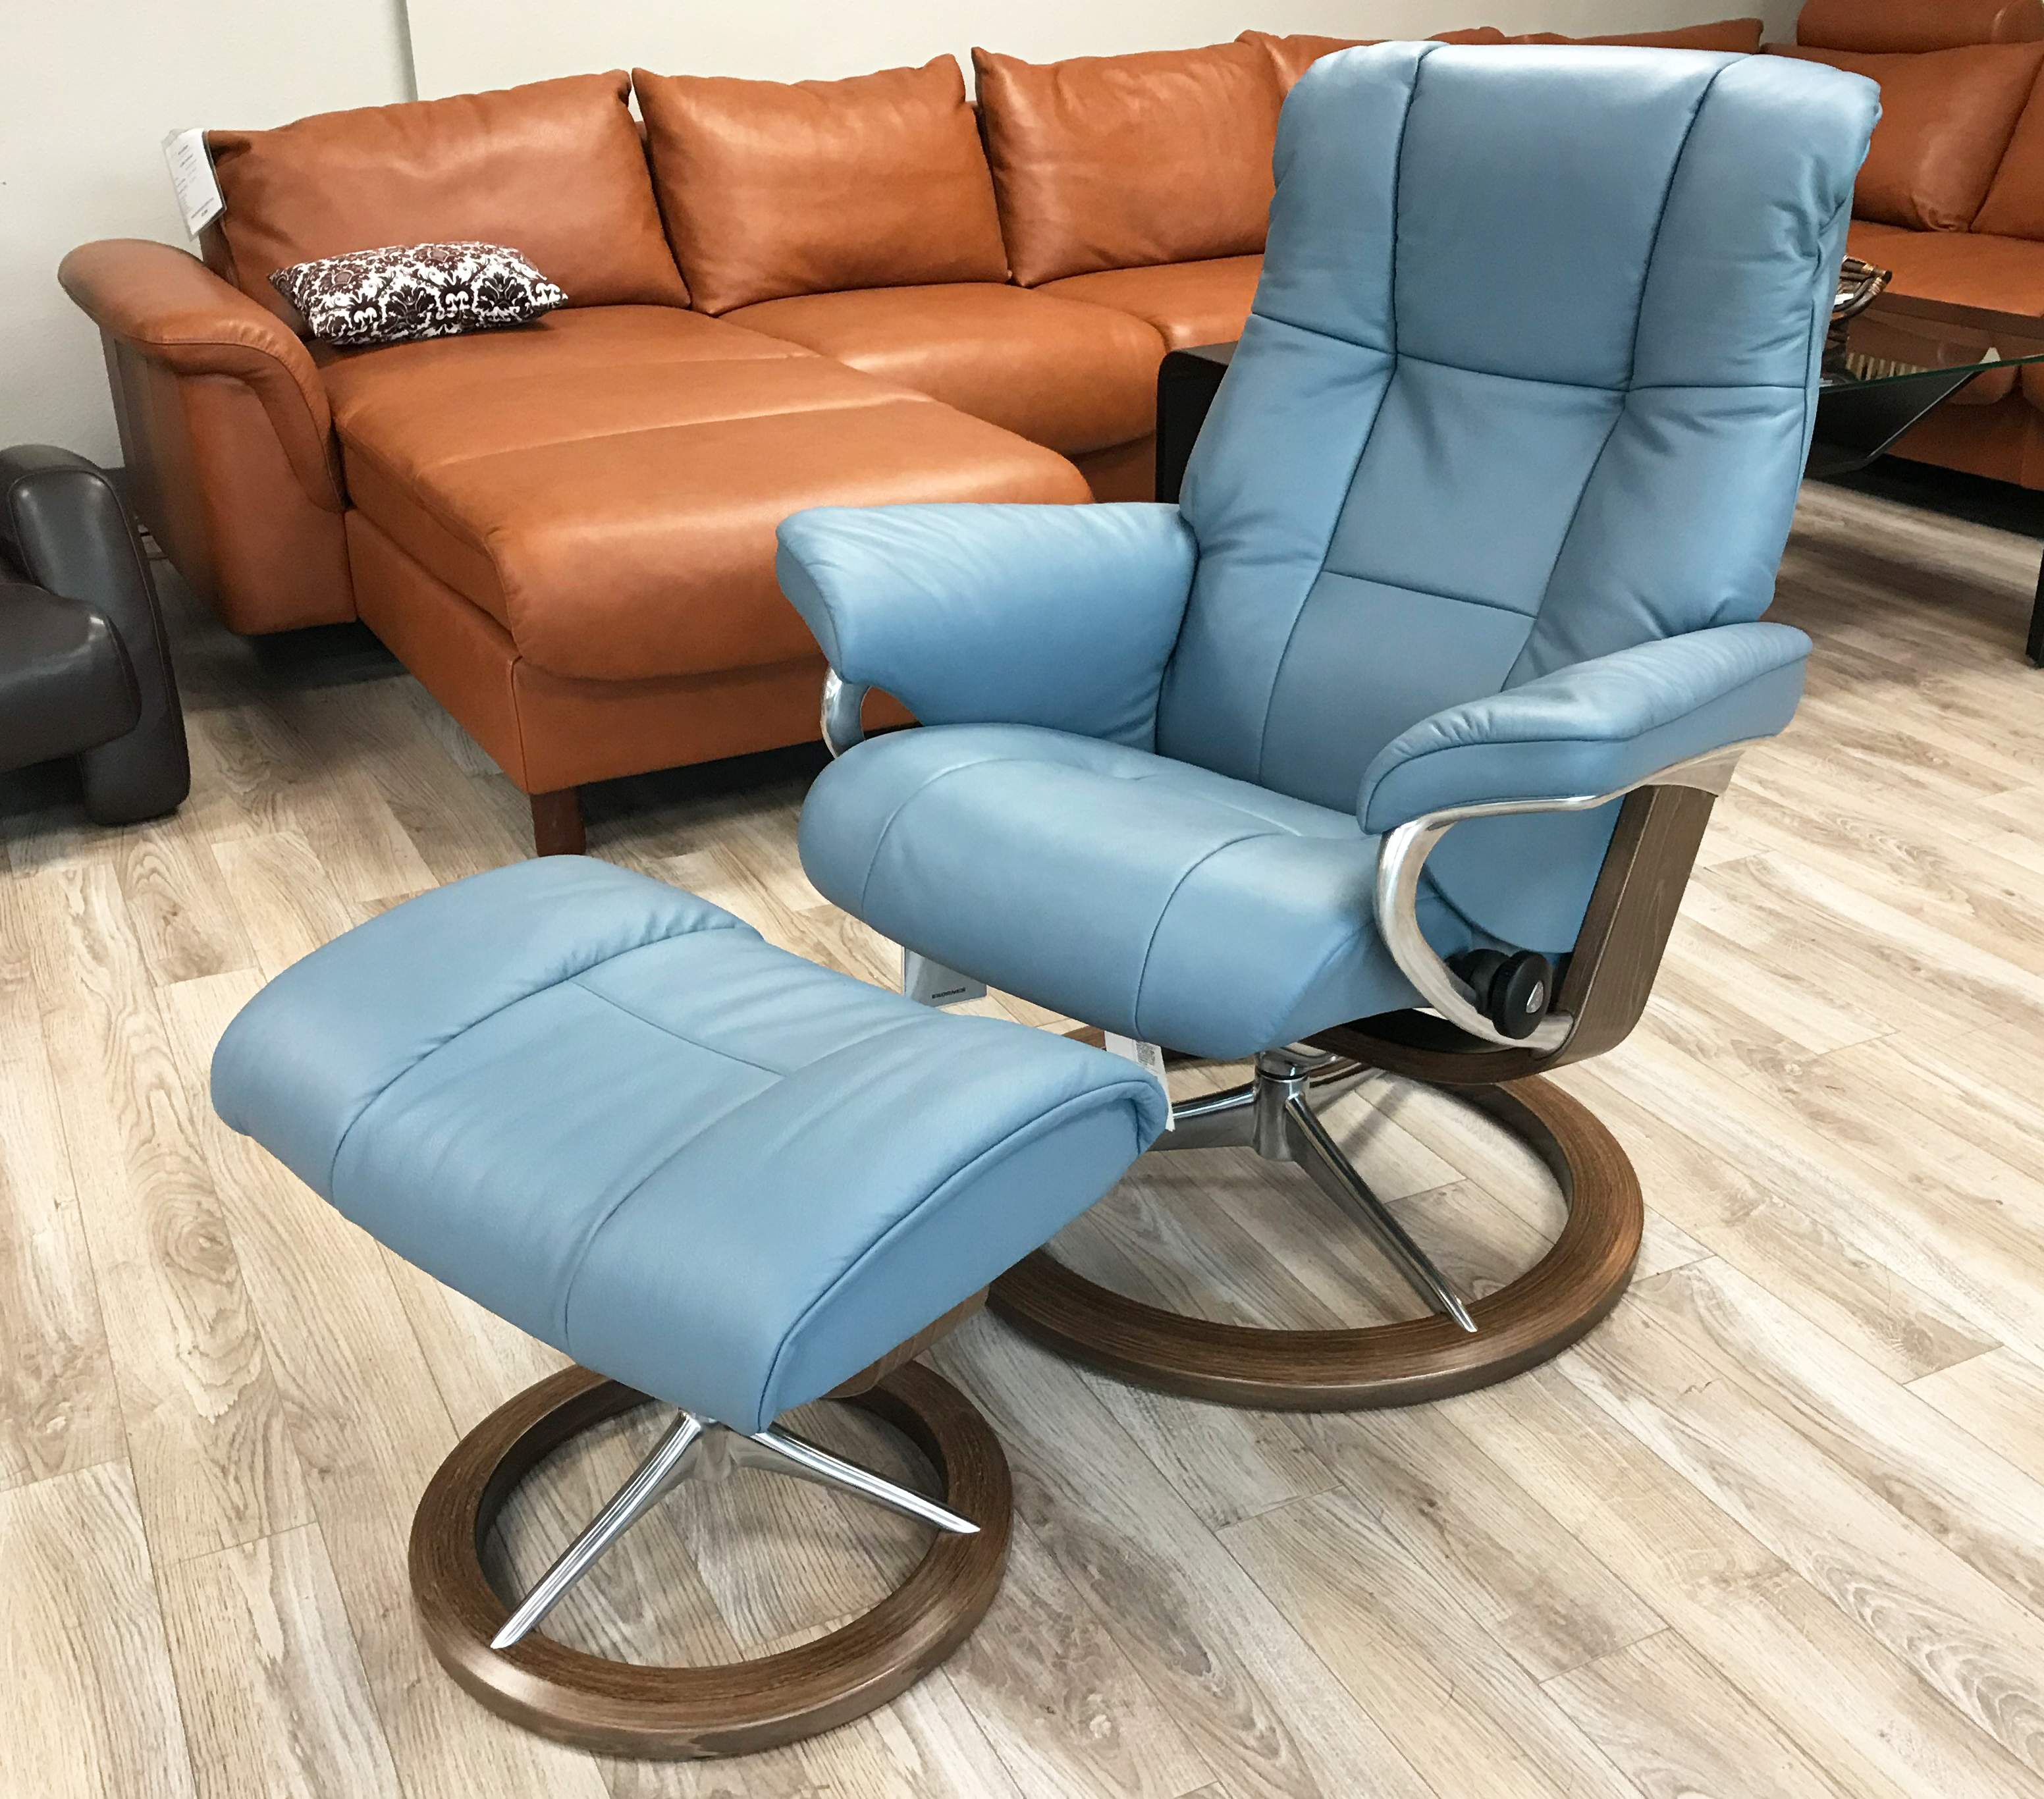 Stressless Mayfair Paloma Sparrow Blue, Navy Leather Recliner Chairs